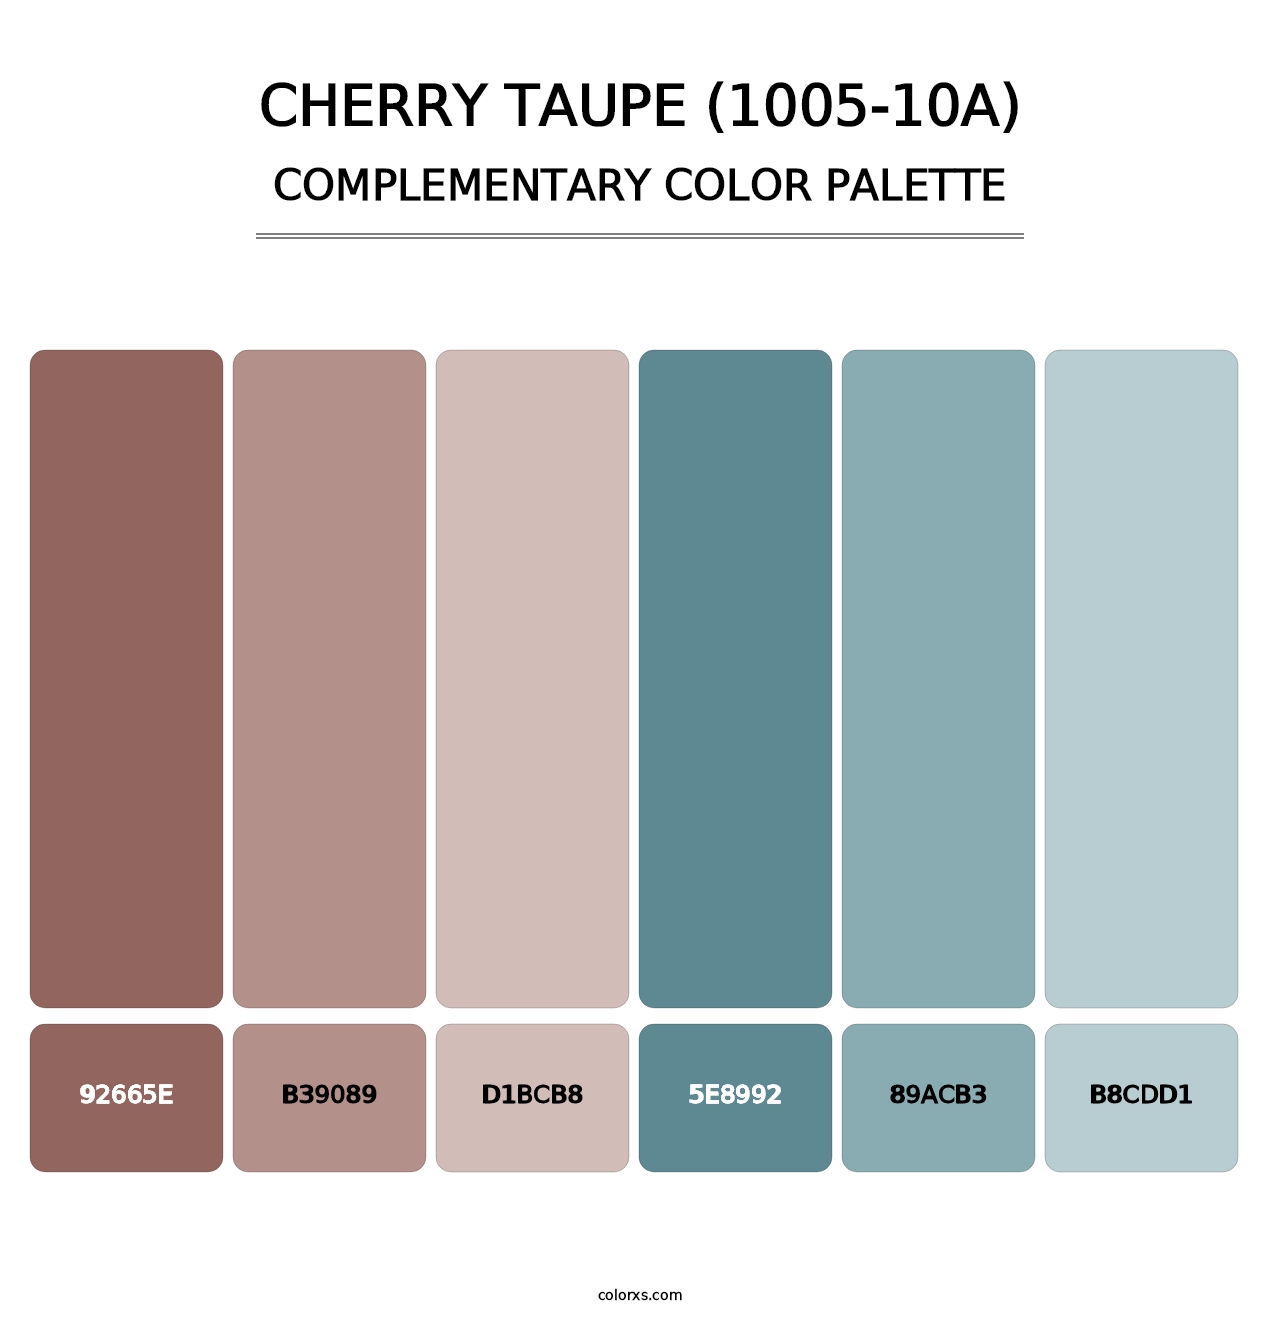 Cherry Taupe (1005-10A) - Complementary Color Palette